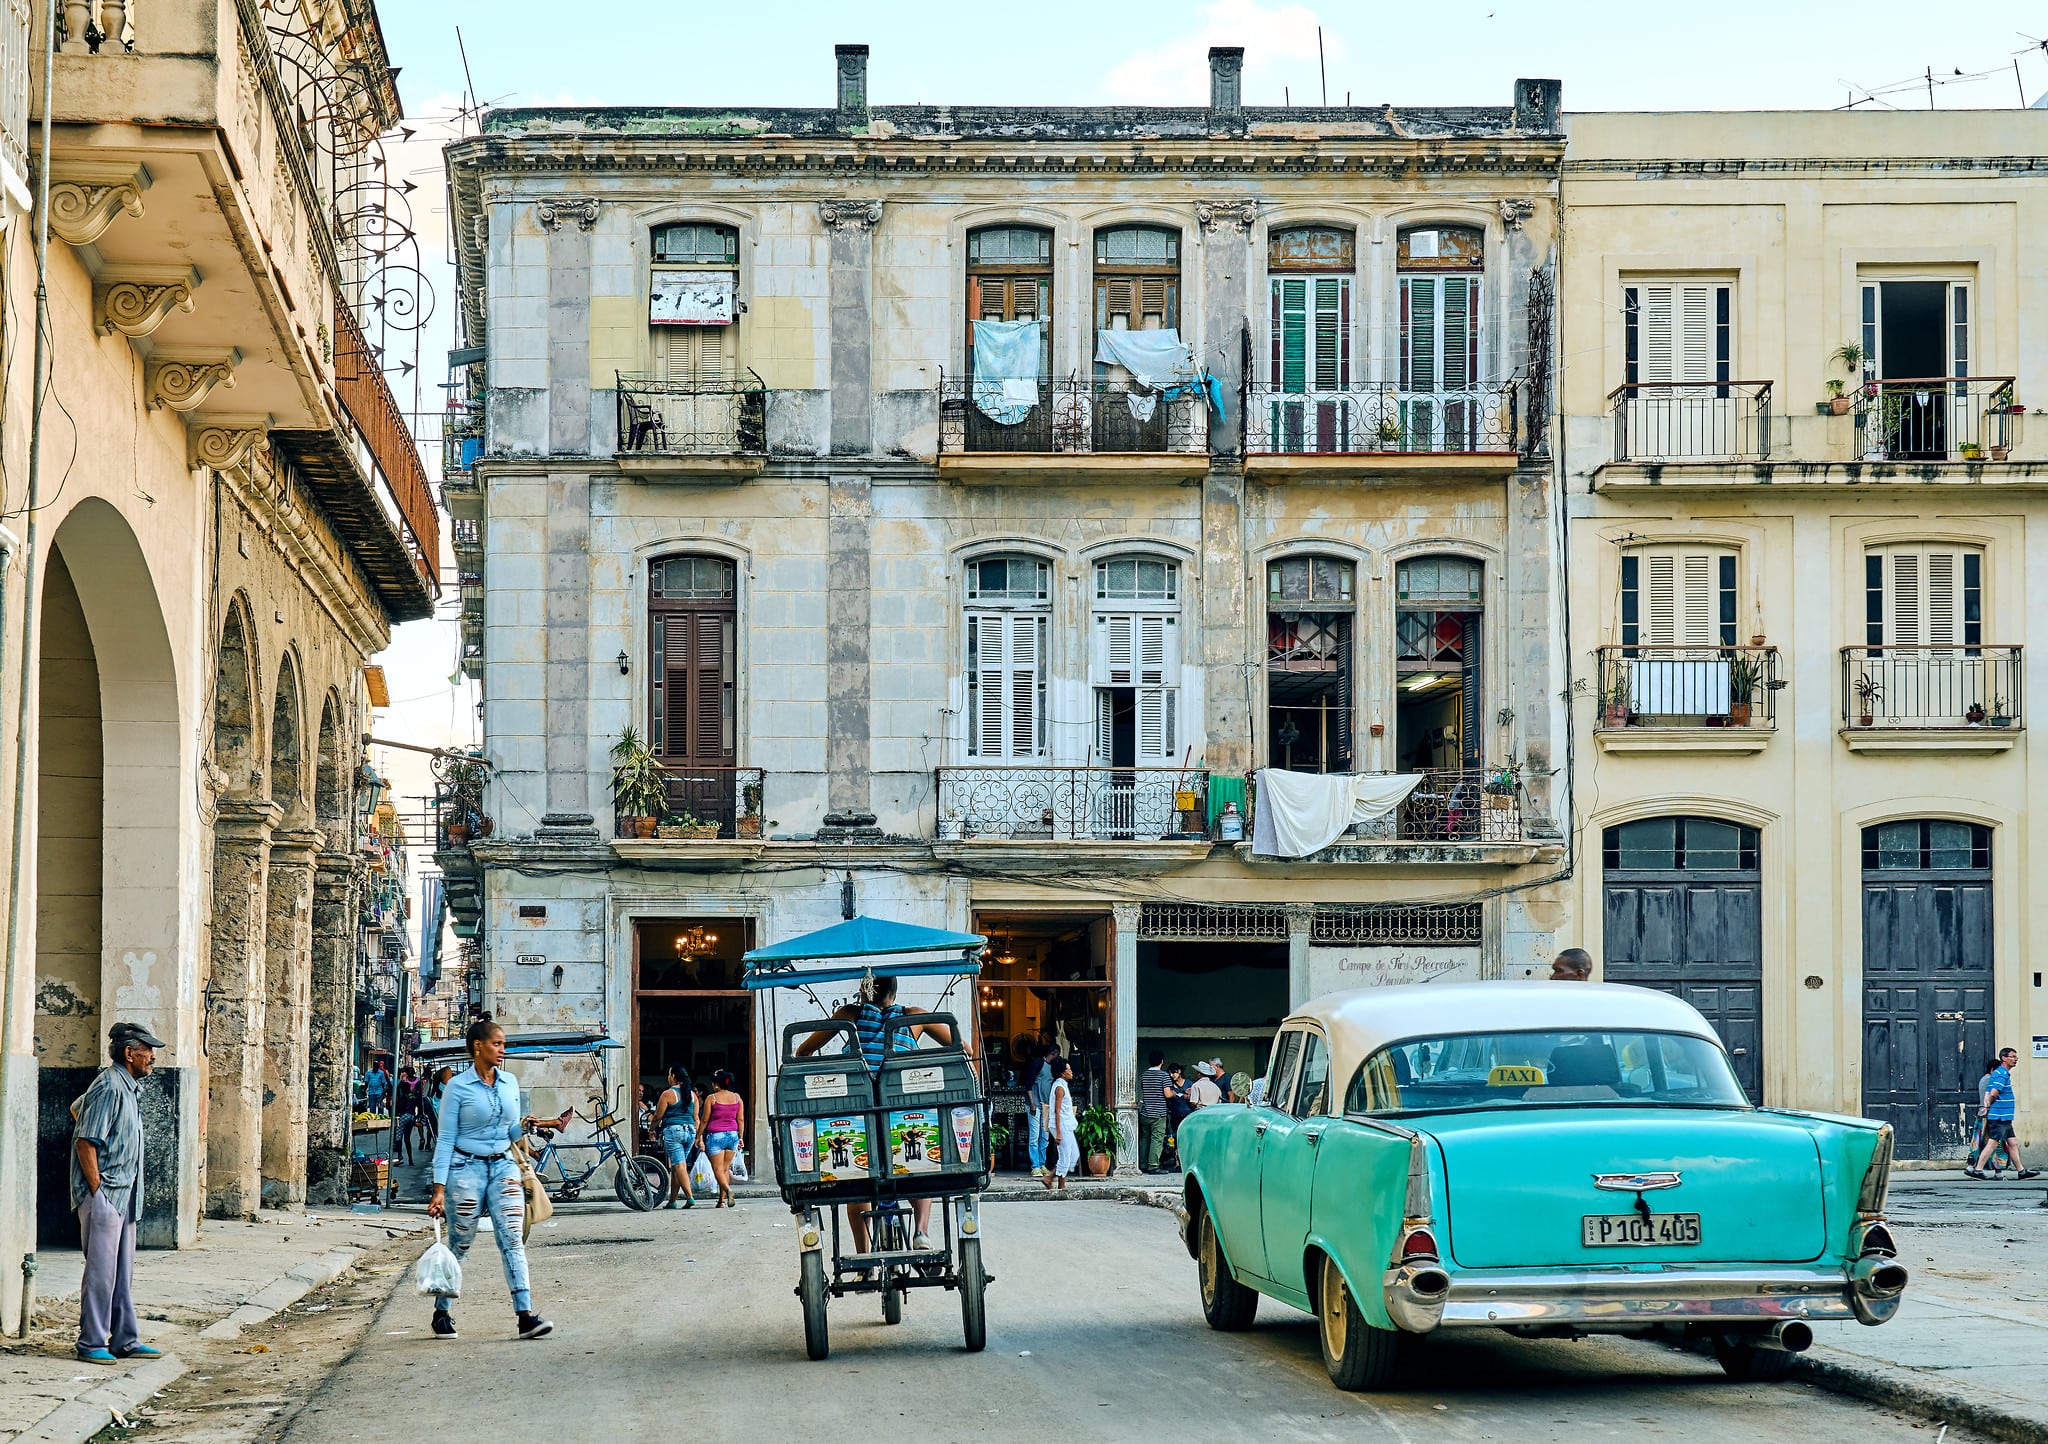 location scouting, Cuba Filming Locations